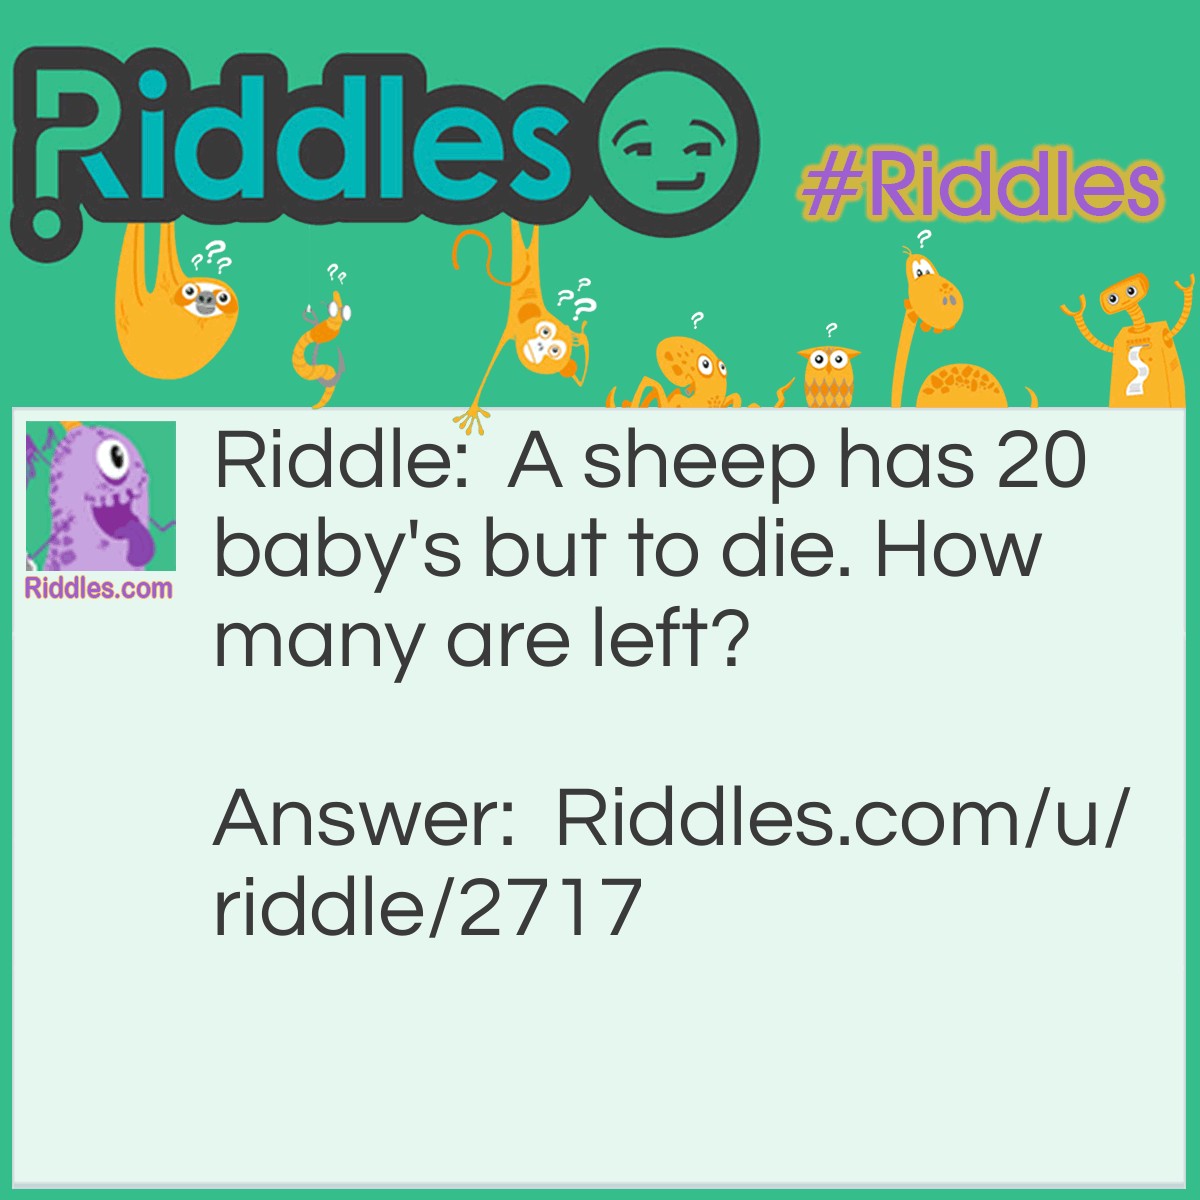 Riddle: A sheep has 20 babies but to die. How many are left? Answer: 20, because to die not two die.